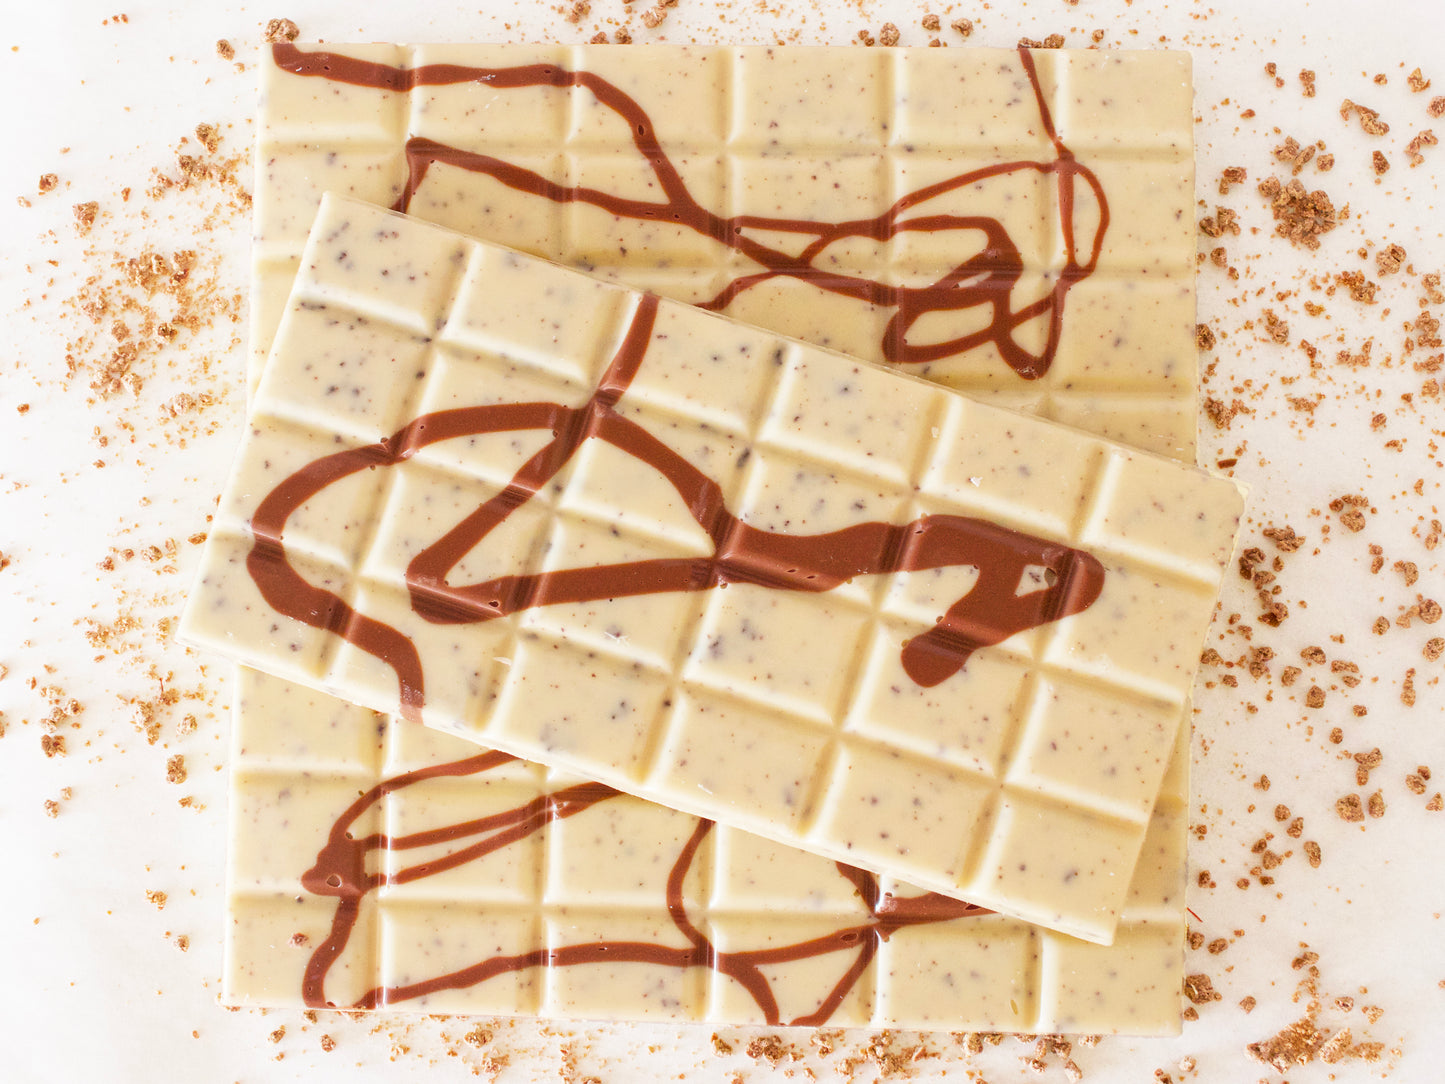 Image shows 3, 100g white chocolate, hand made bars, containing natural coffee grains and drizzled with milk chocolate.